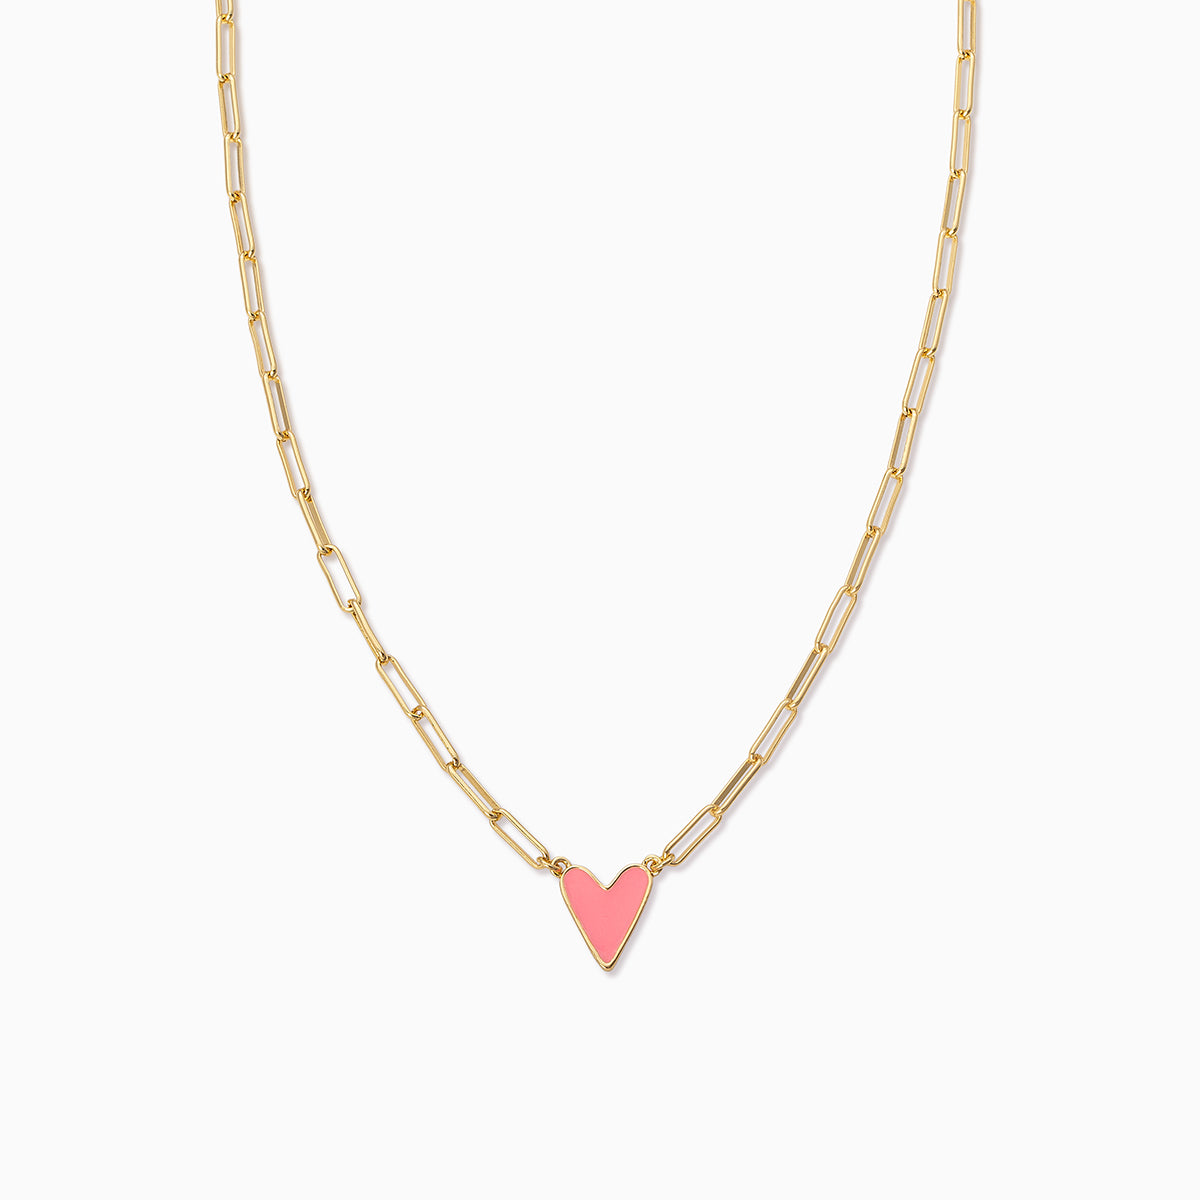 Enamel Heart Necklace | Hot Pink | Product Image | Uncommon James